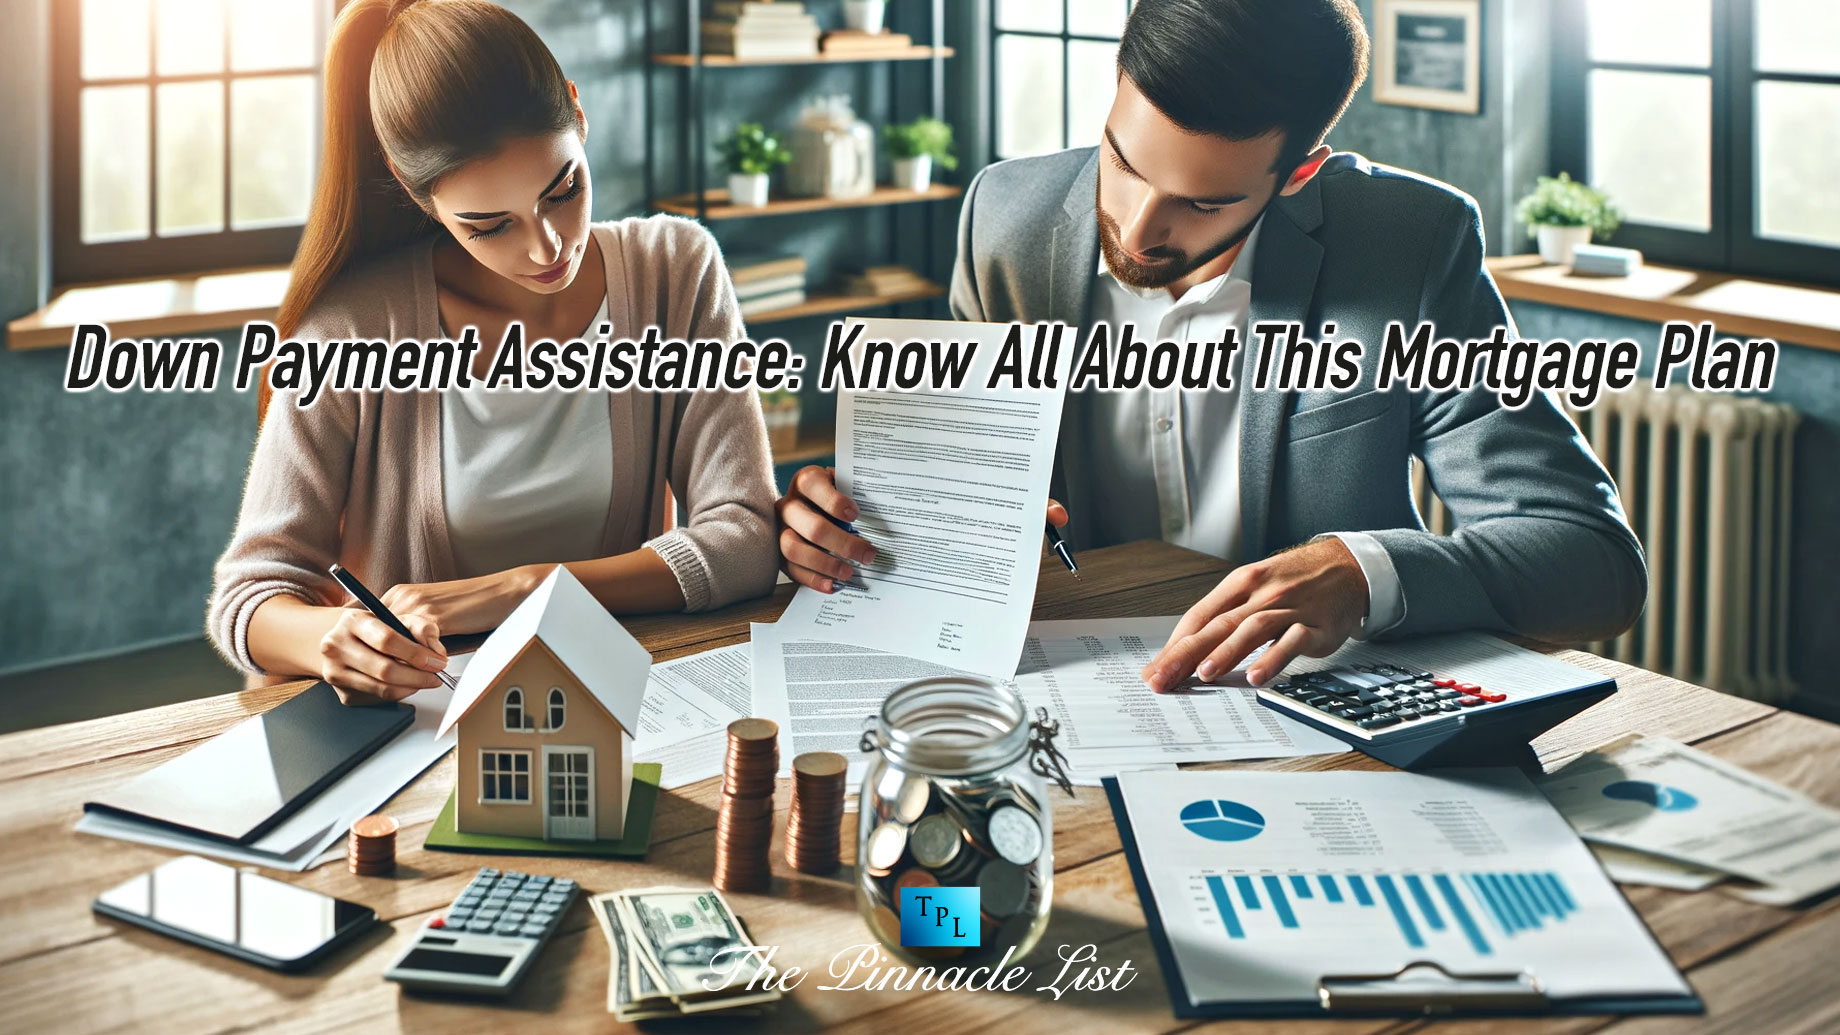 Down Payment Assistance: Know All About This Mortgage Plan